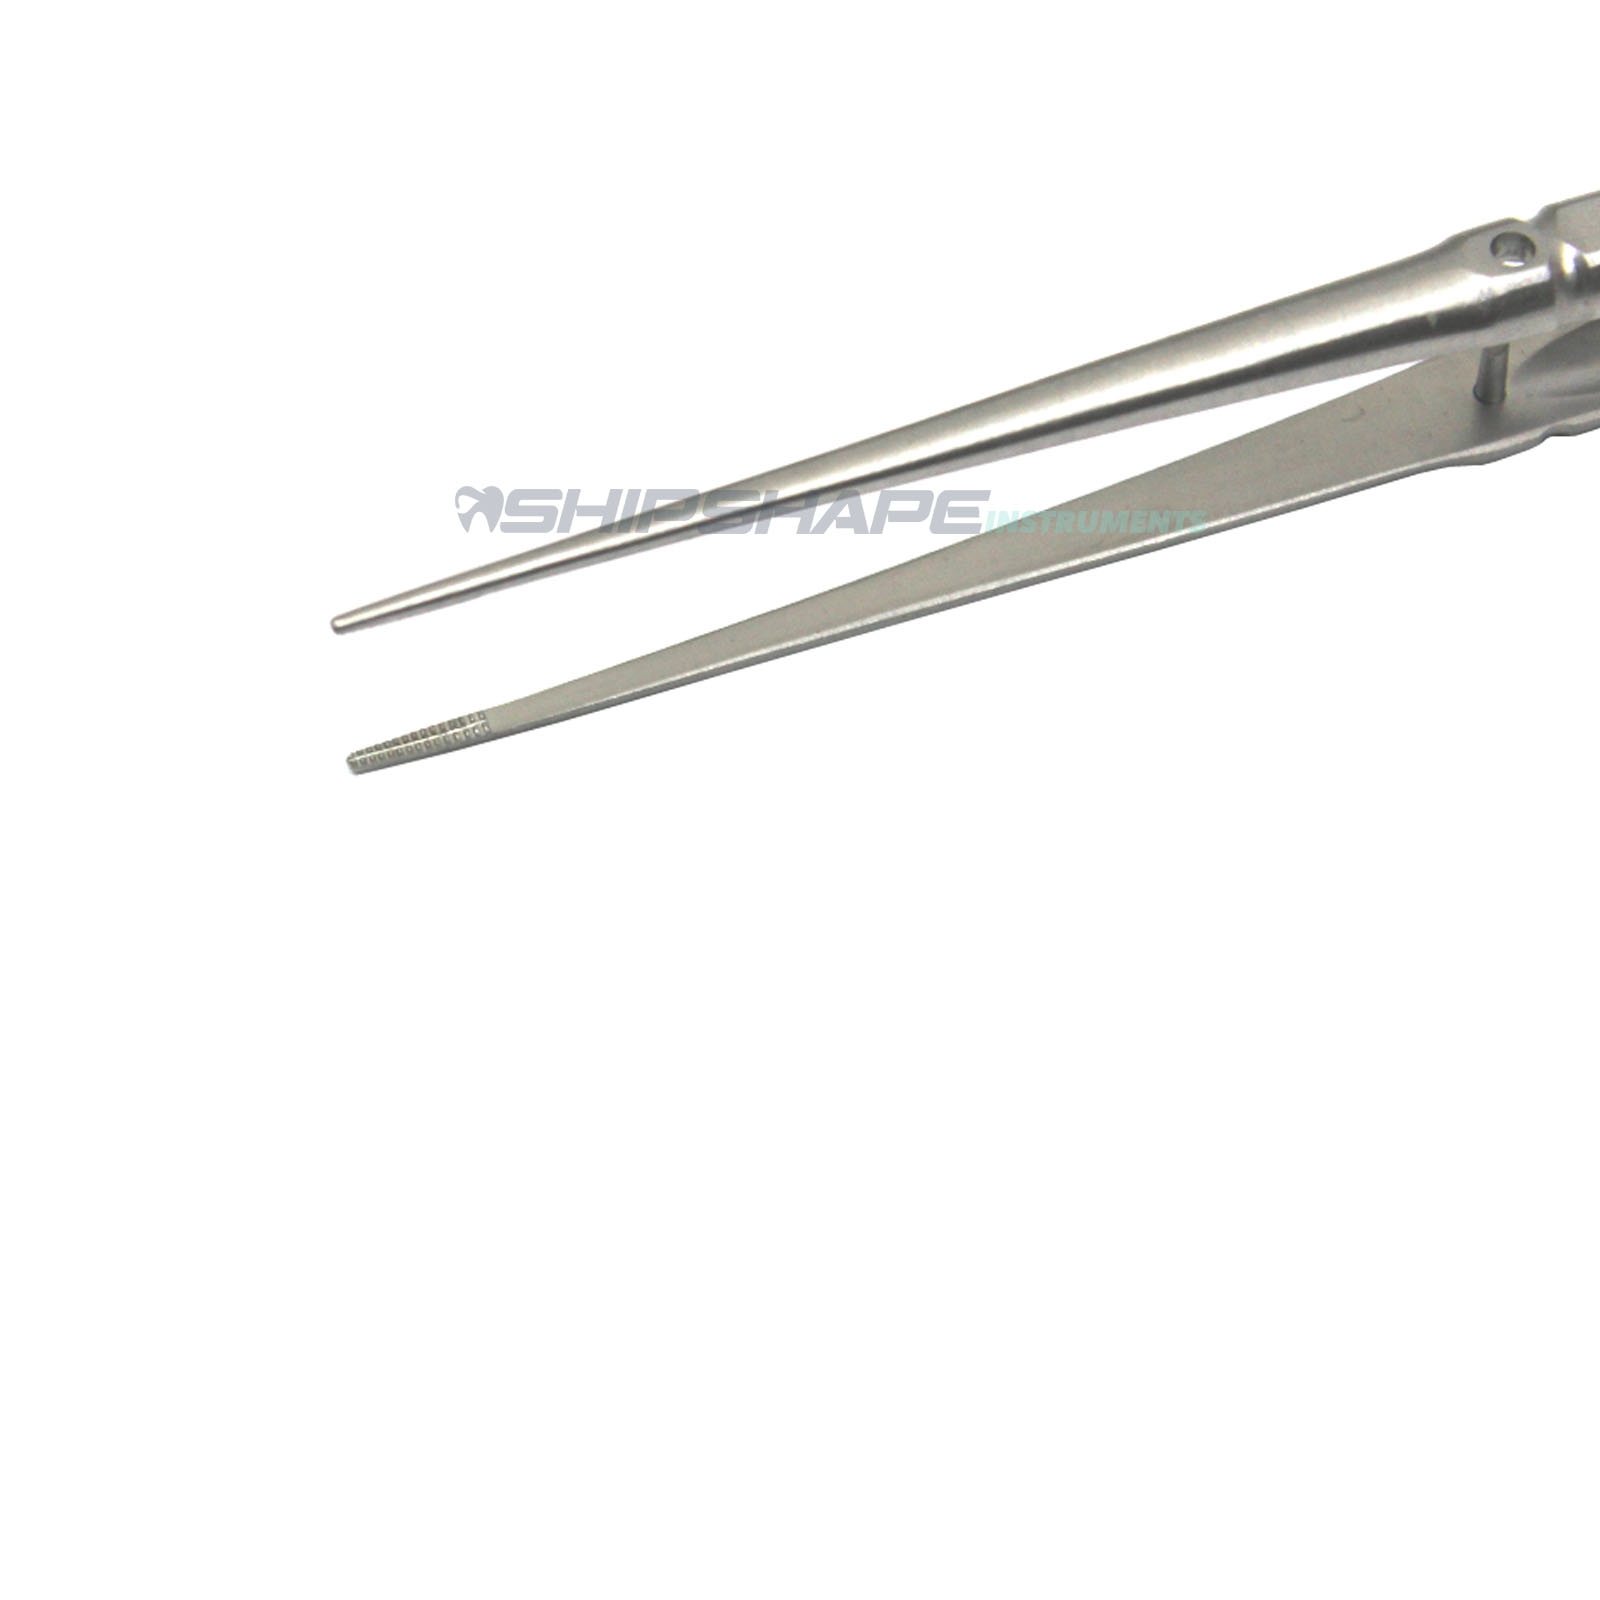 Gerald Delicate Tissue Forceps #NZ635R 18CM TC Ophthalmic Plastic Surgery Dental Surgical Instruments-1196